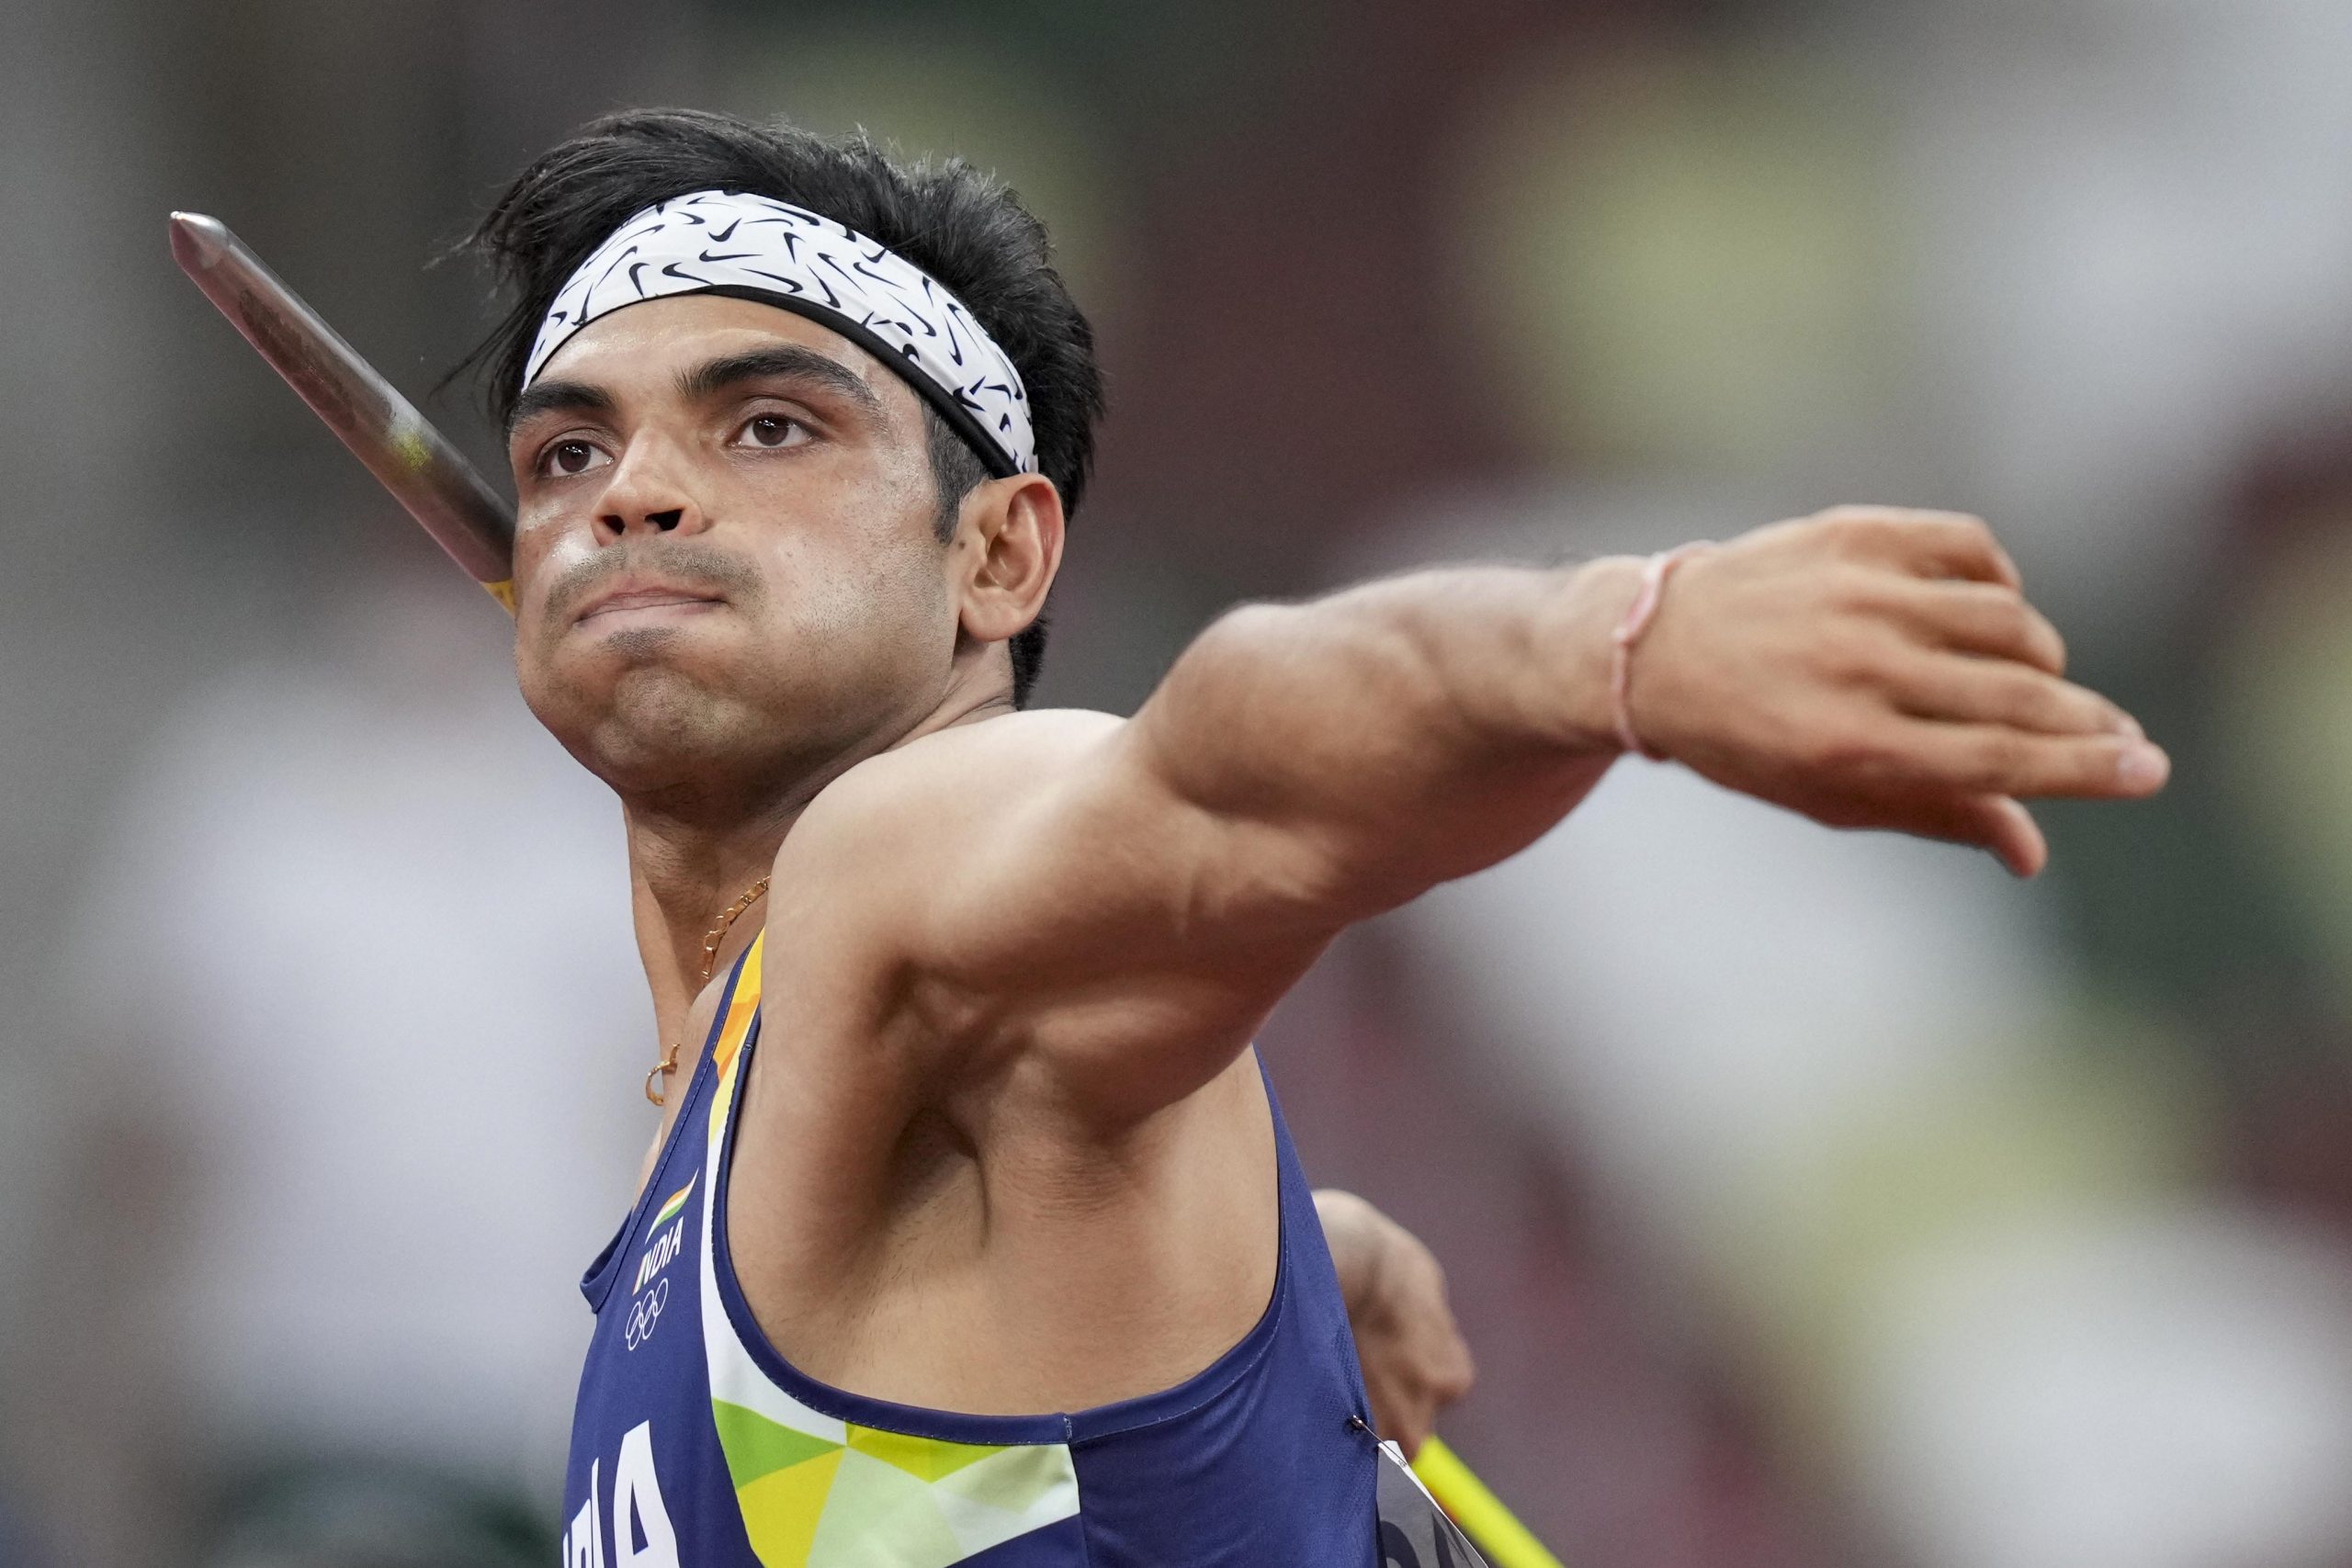 Watch: Neeraj Chopra gets call from PM Modi after historic Olympic gold